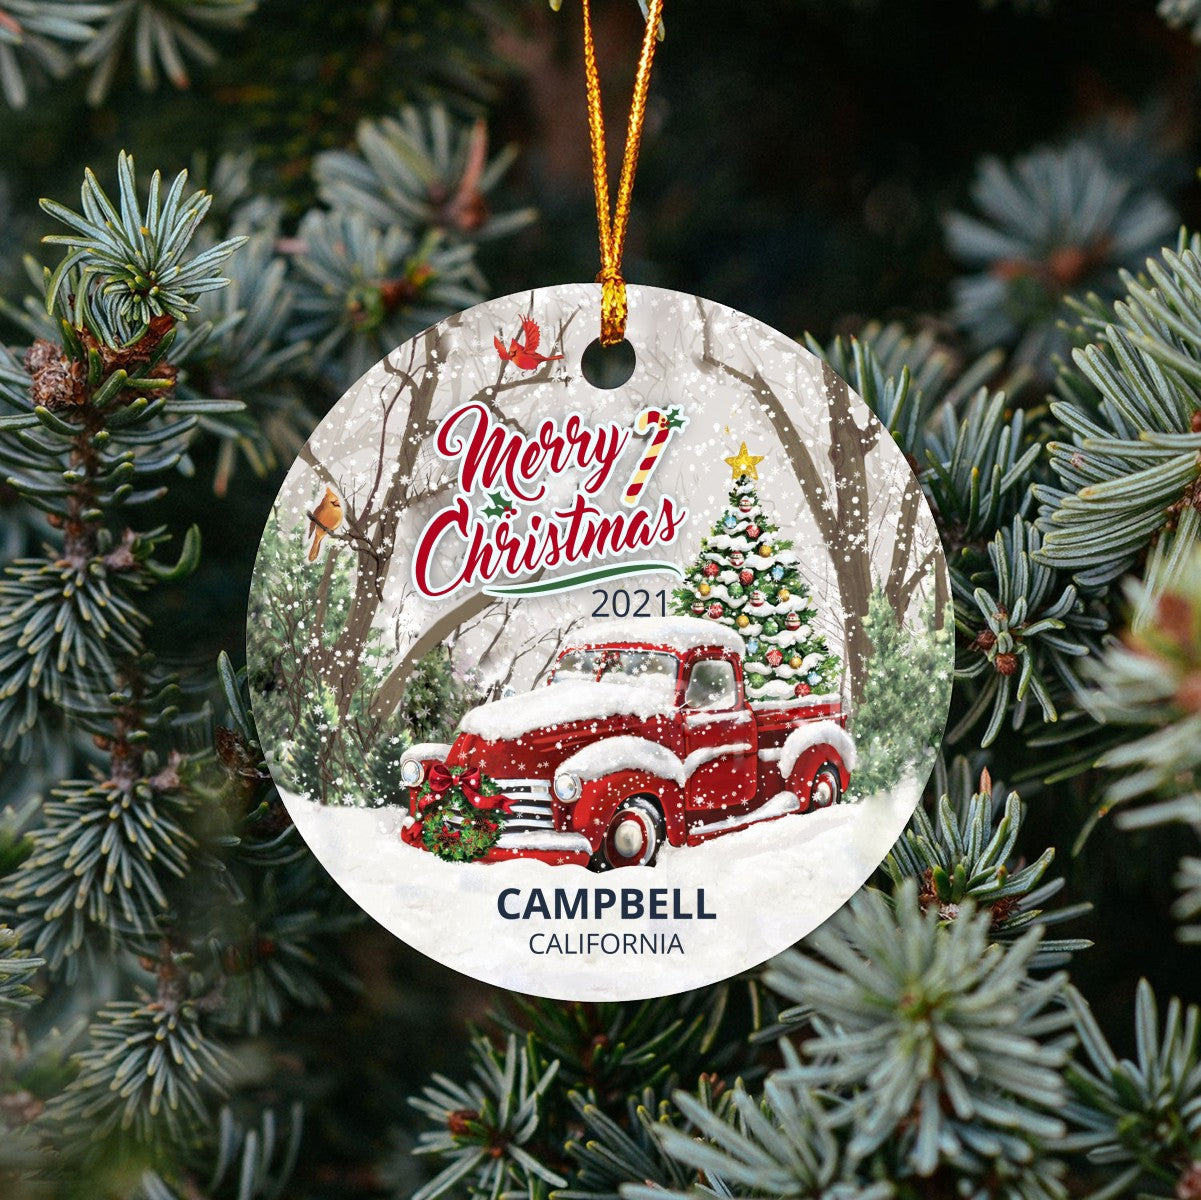 Christmas Tree Ornaments Campbell - Ornament Customize With Name City And State Campbell California CA - Red Truck Xmas Ornaments 3'' Plastic Gift For Family, Friend And Housewarming